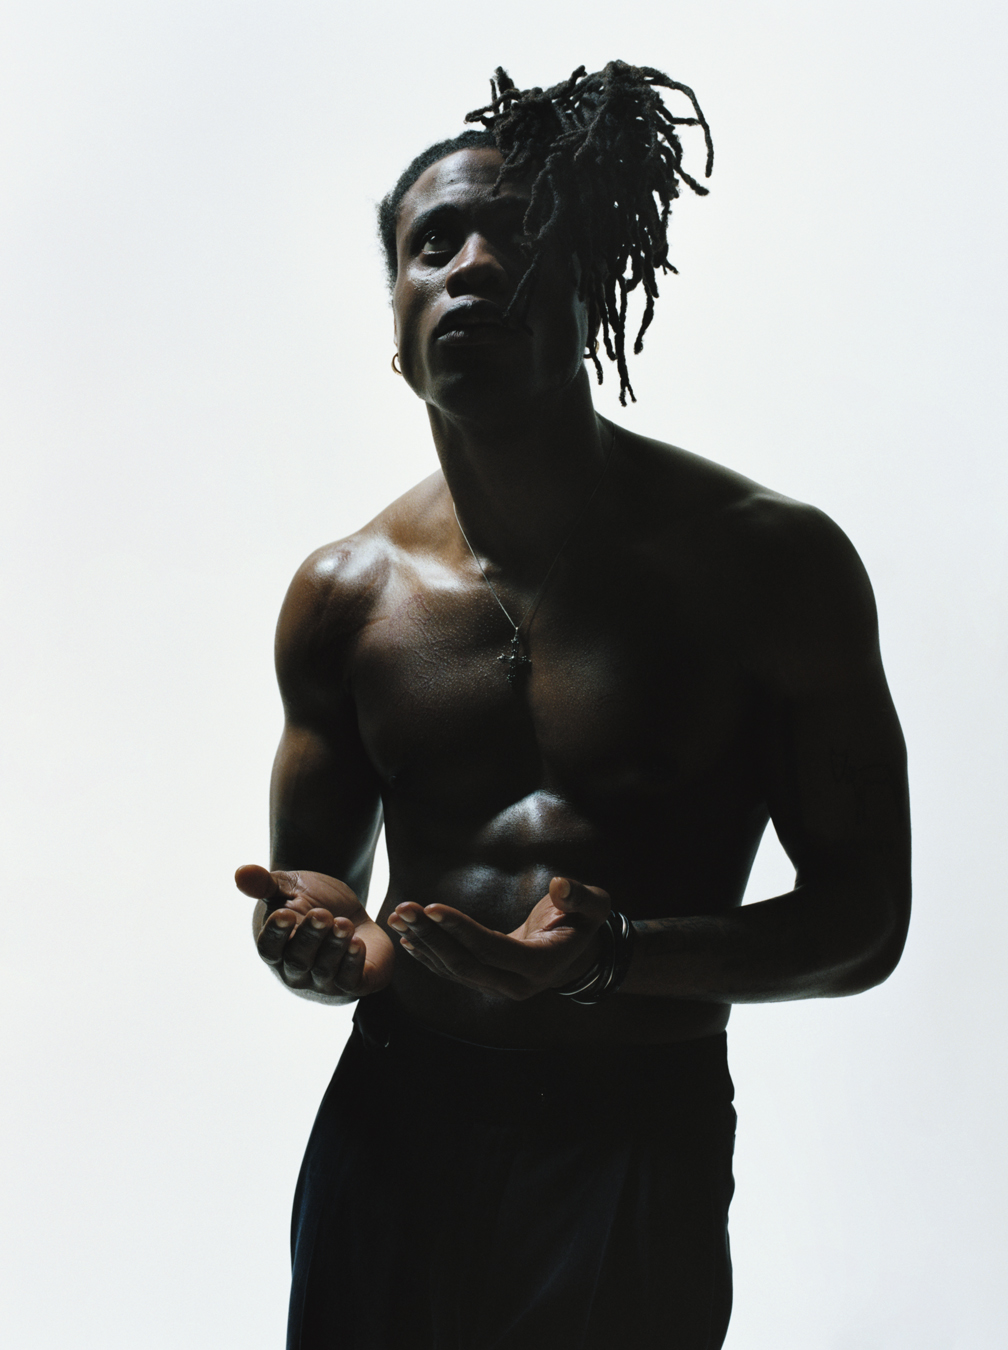 Obongjayar in i-D 367 The Out Of Body Issue 